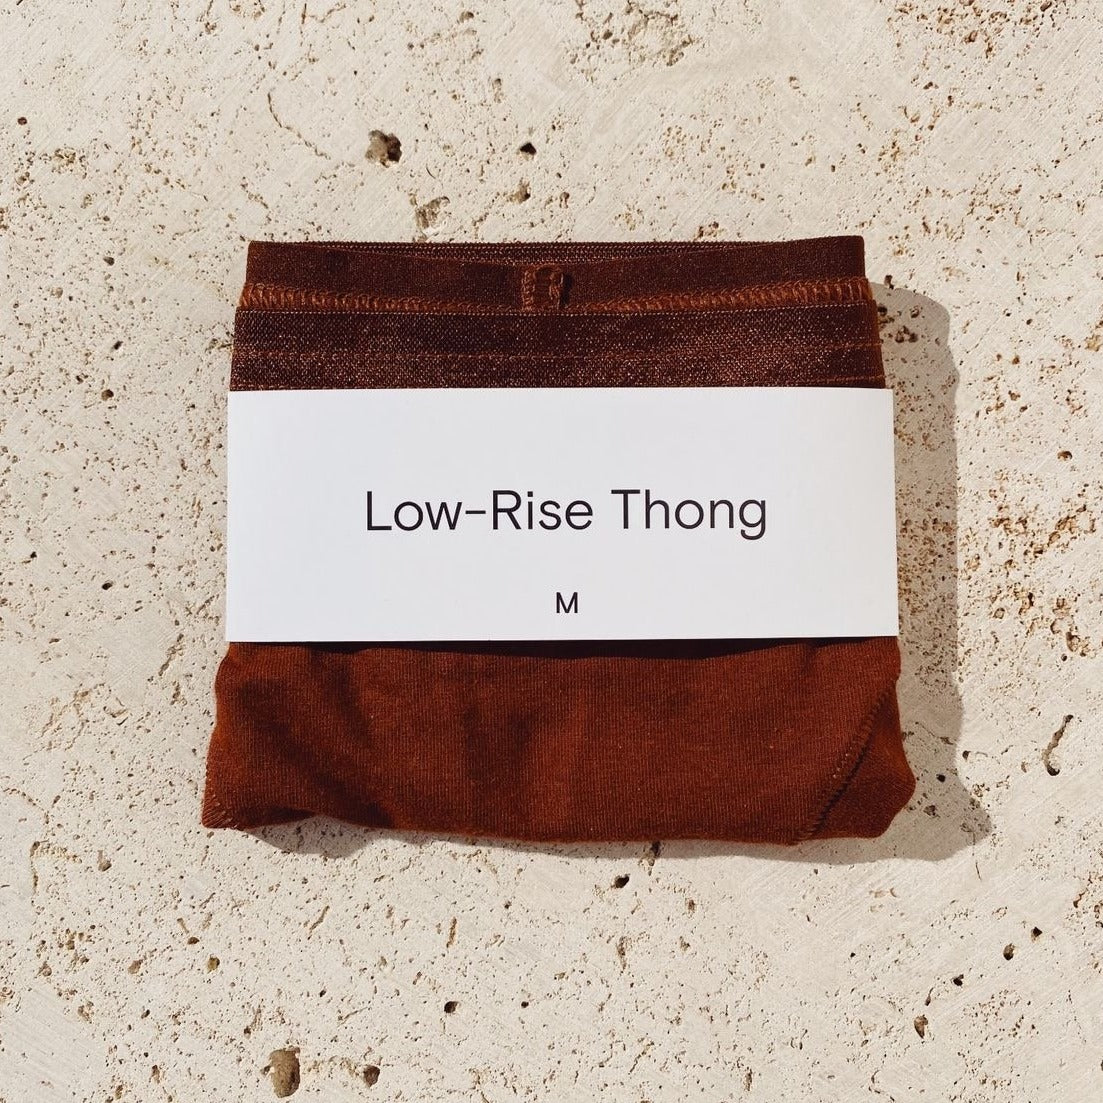 low-rise thong by subset (formerly knickey)